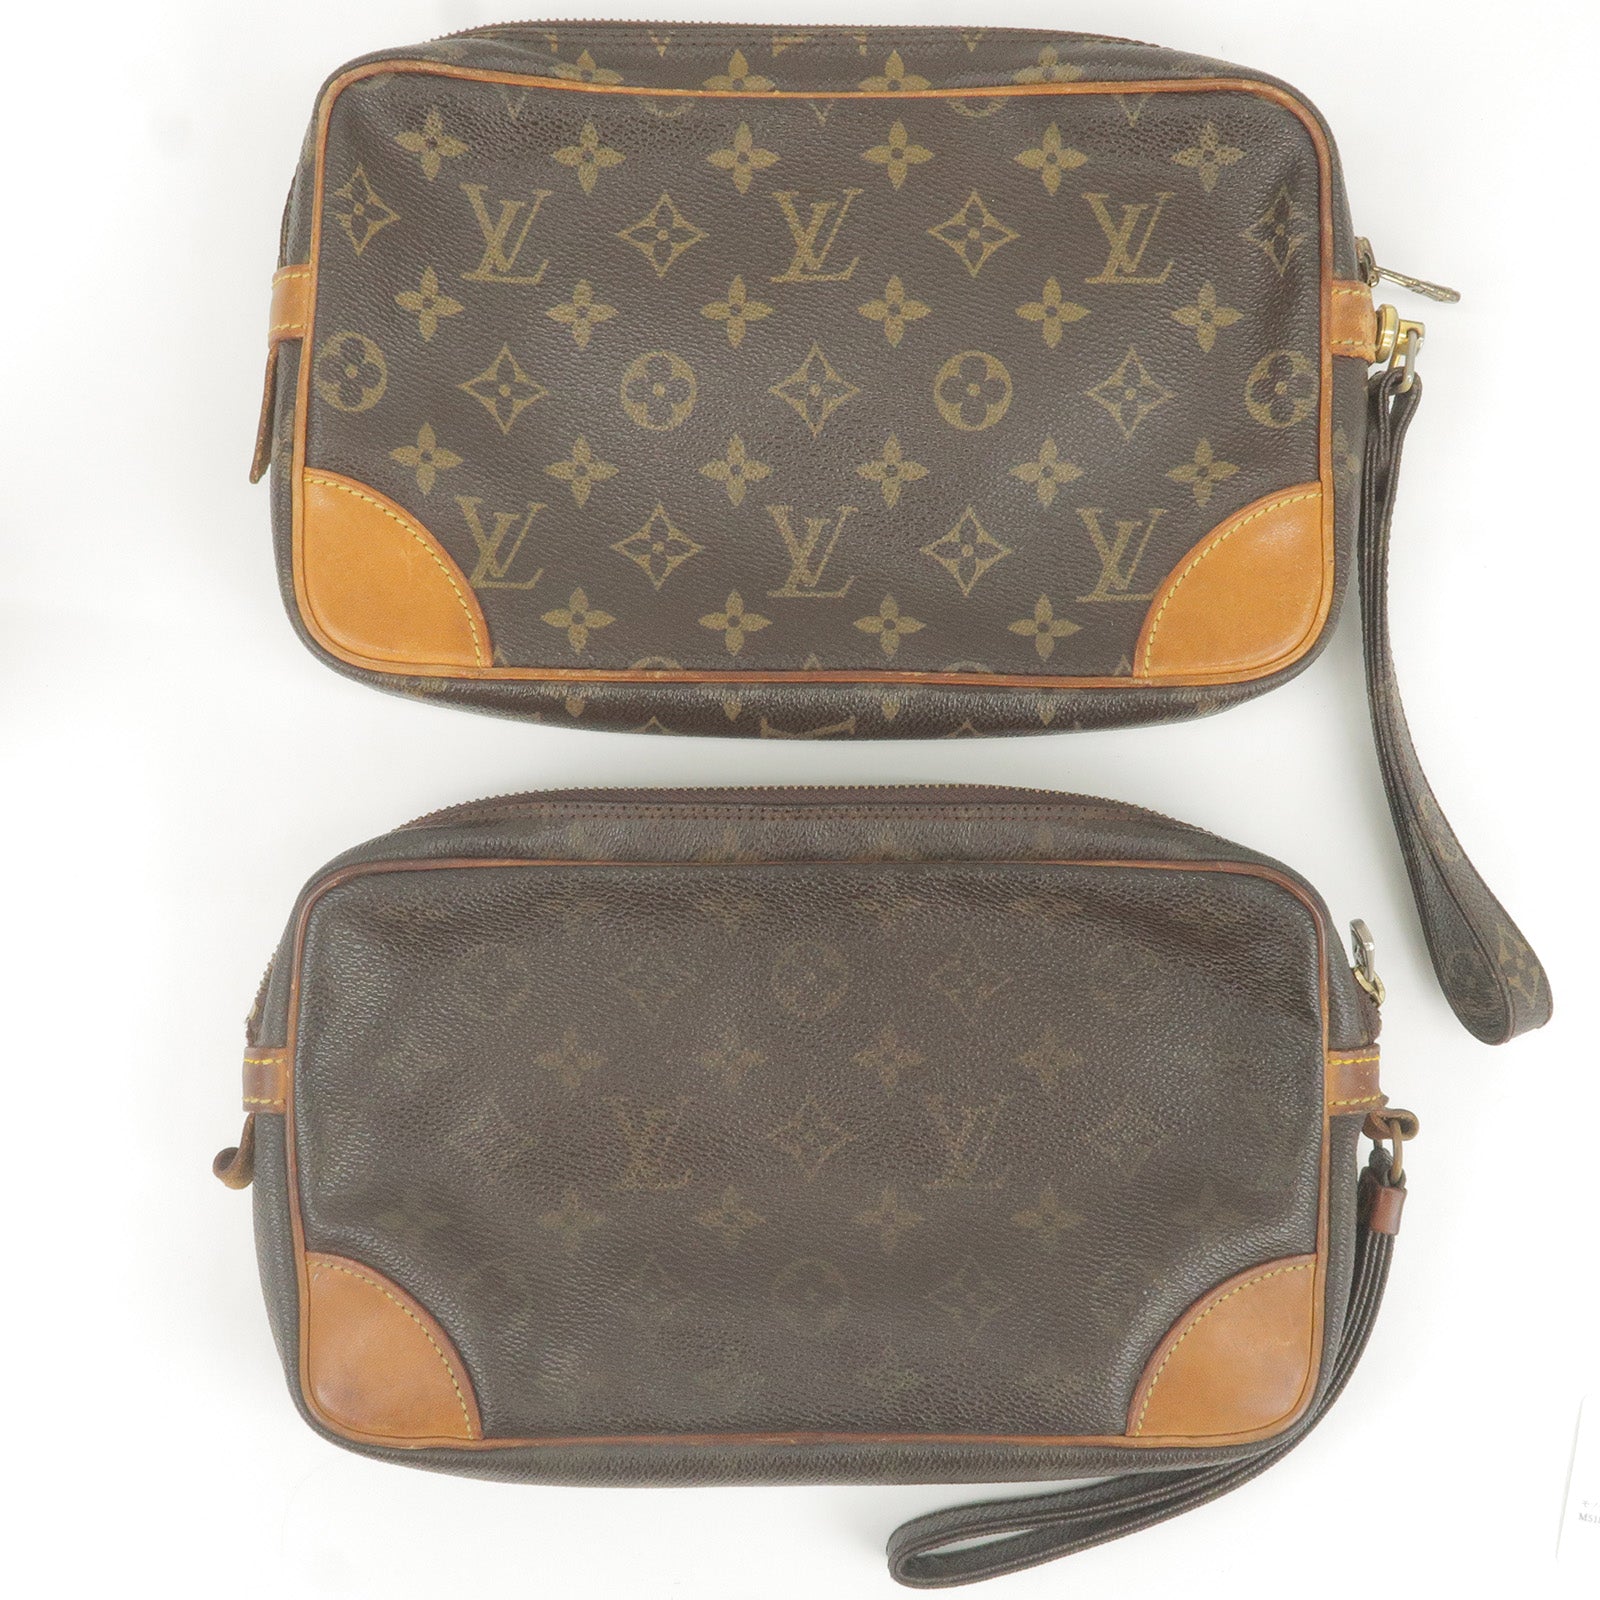 2 - ep_vintage luxury Store - Marly - Louis Vuitton Coussin PM